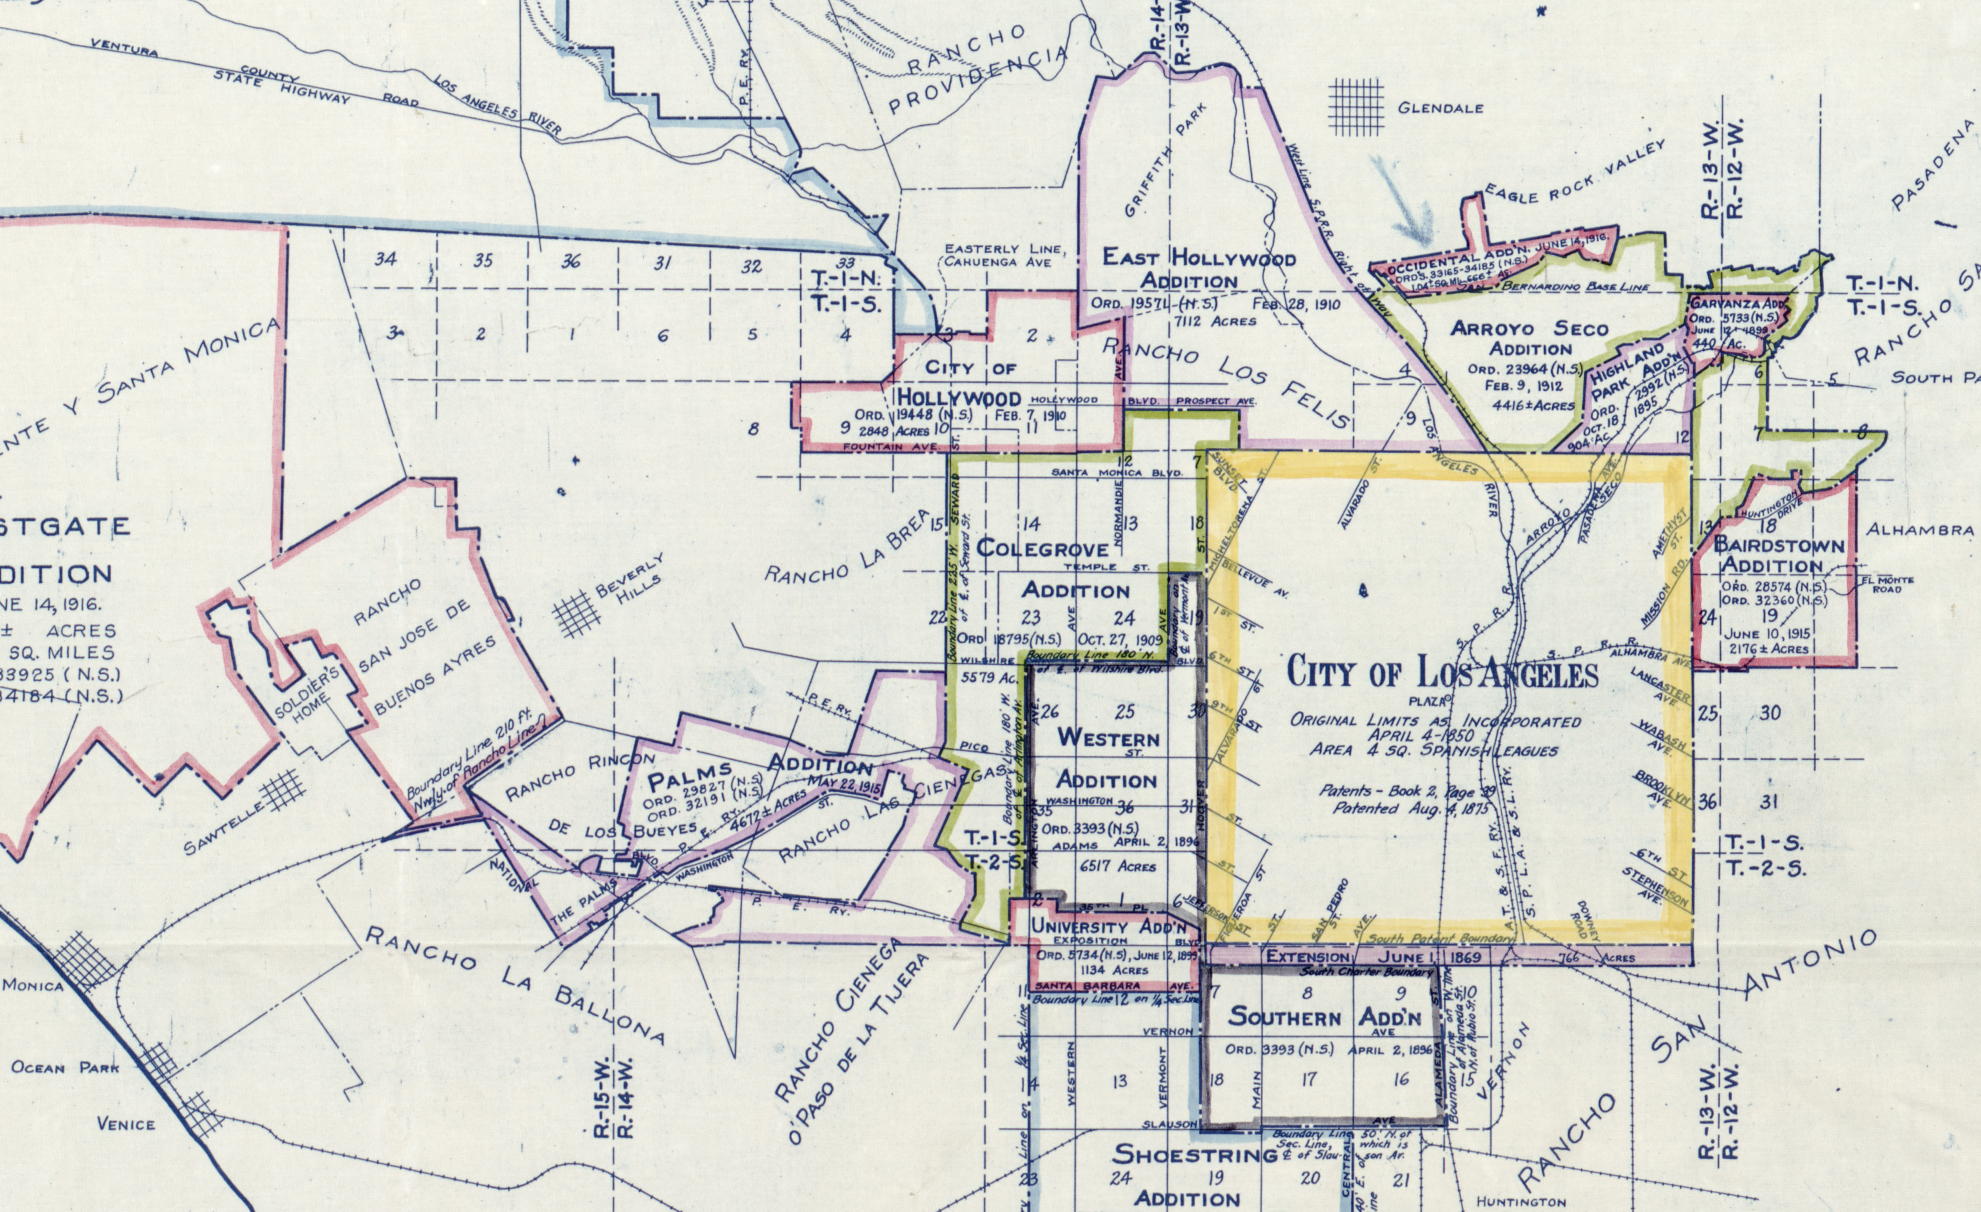 Map of annexations to Los Angeles from 1916